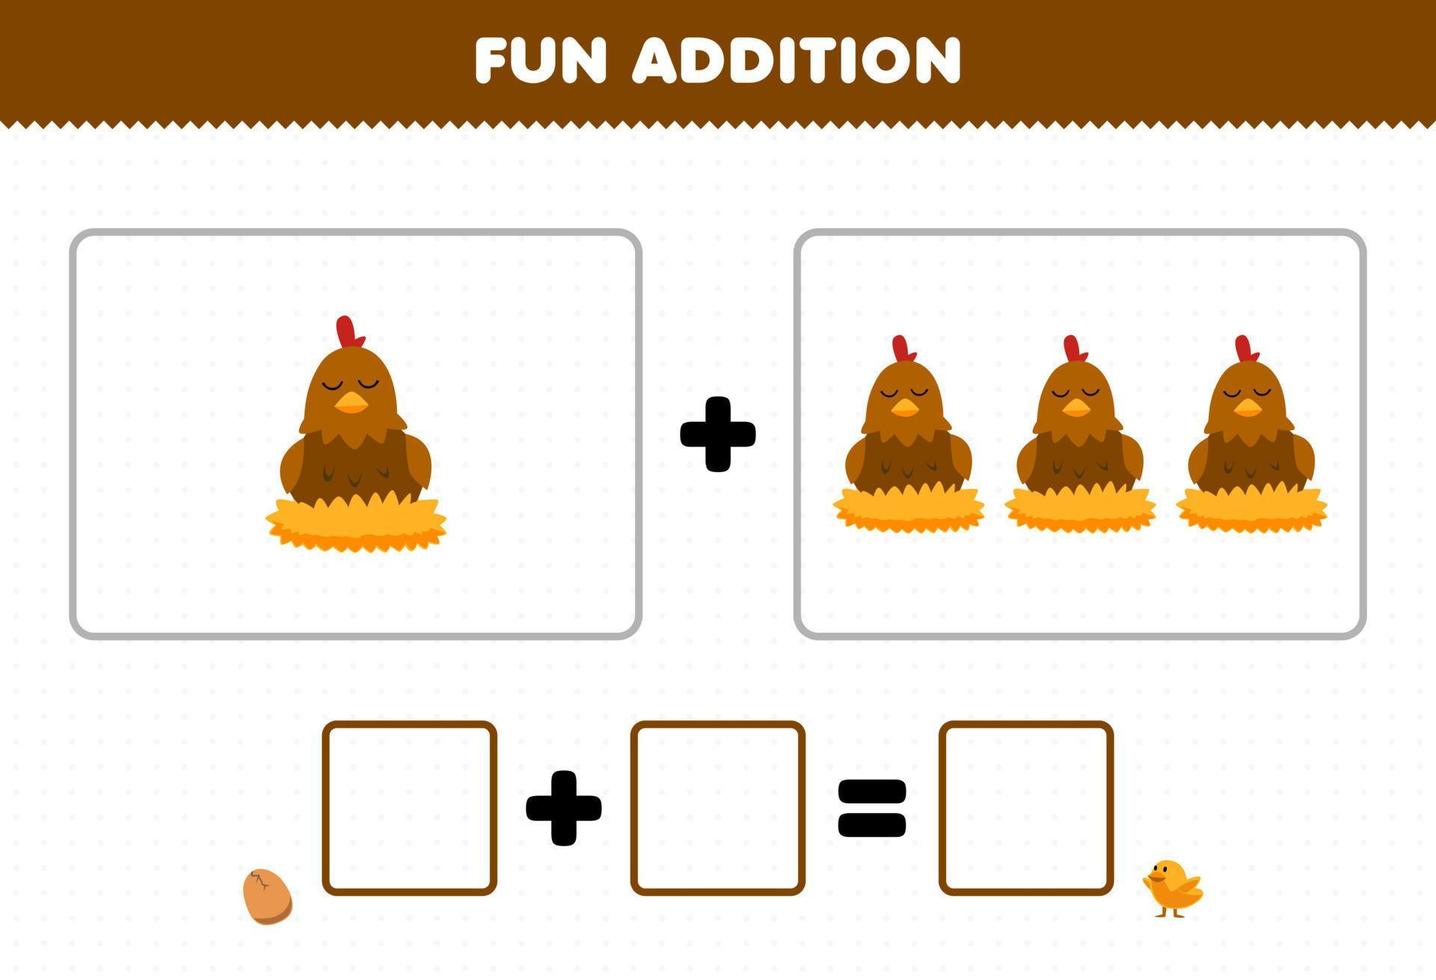 Education game for children fun addition by counting cute cartoon hen chicken in the nest pictures printable farm worksheet vector